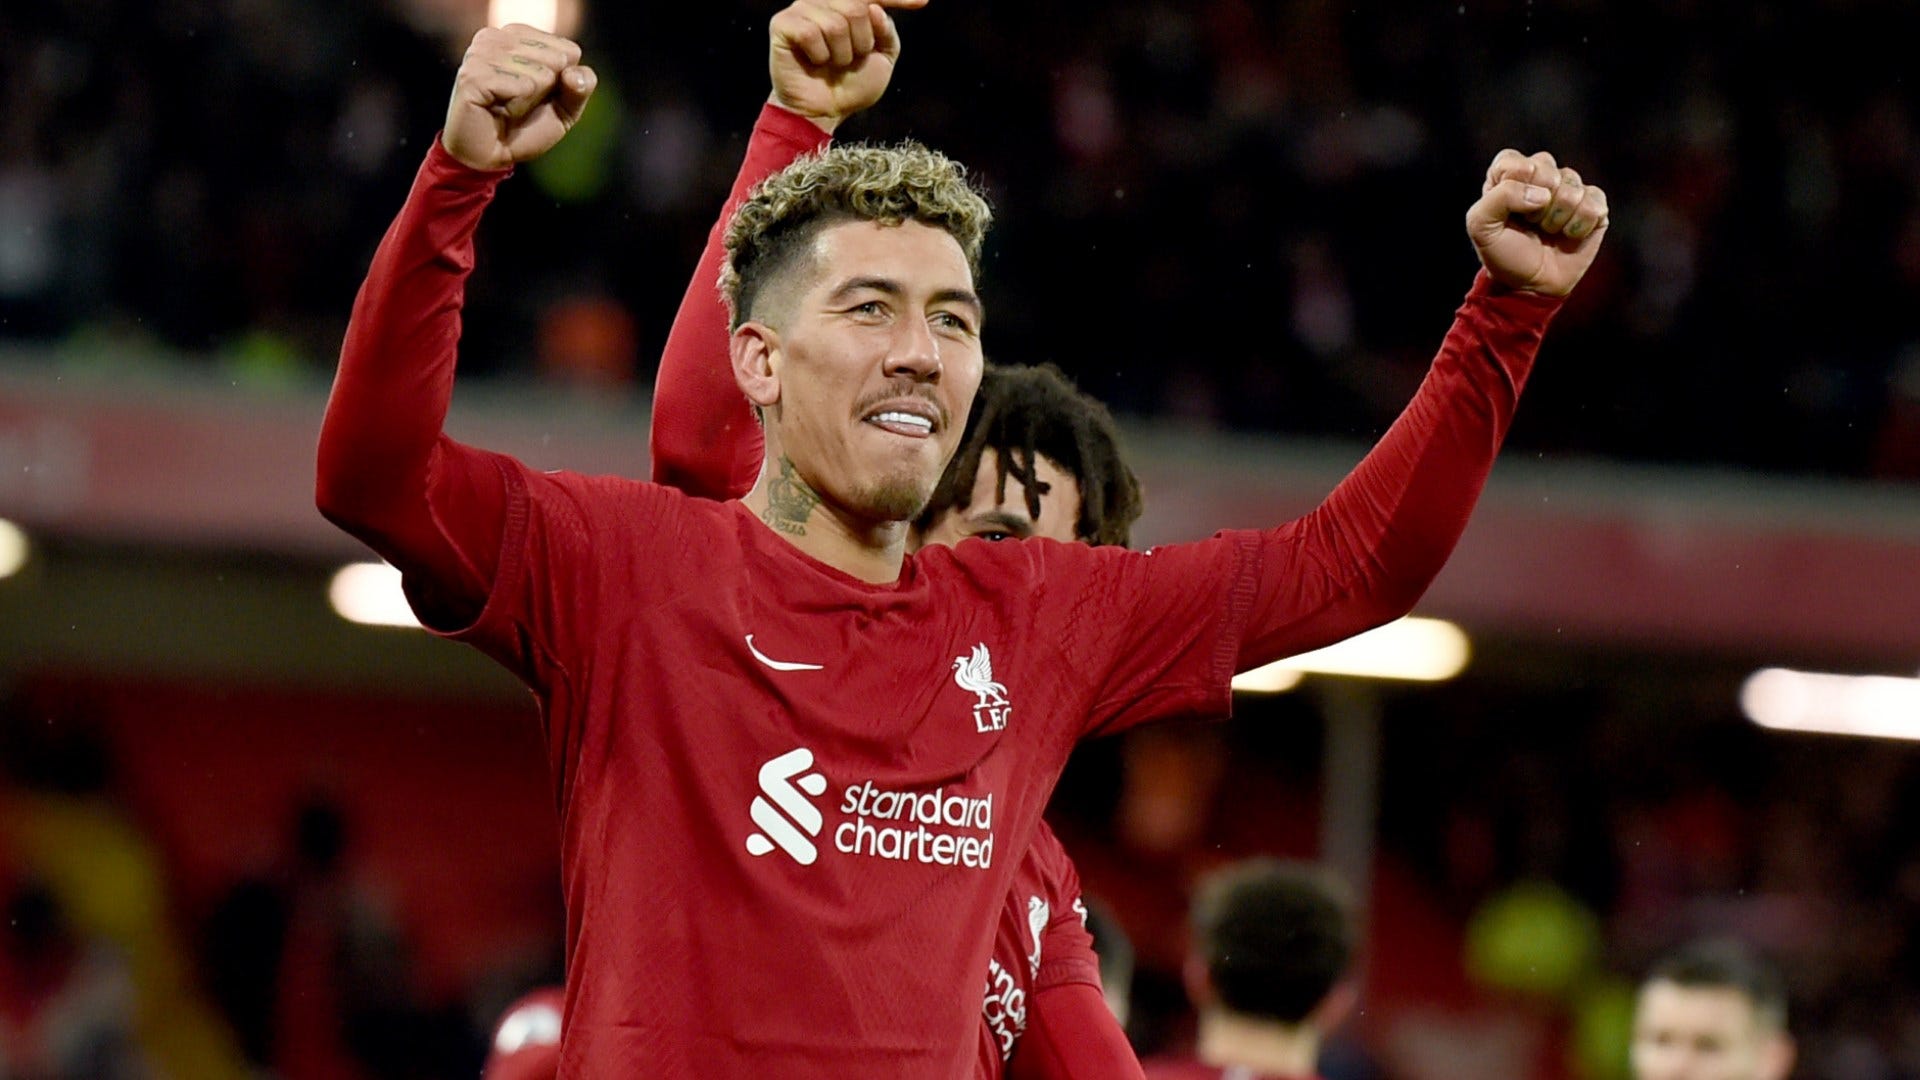 roberto-firmino-s-best-liverpool-moments-slaying-arsenal-outshining-kylian-mbappe-and-amp-san-siro-magic-or-goal-com-india